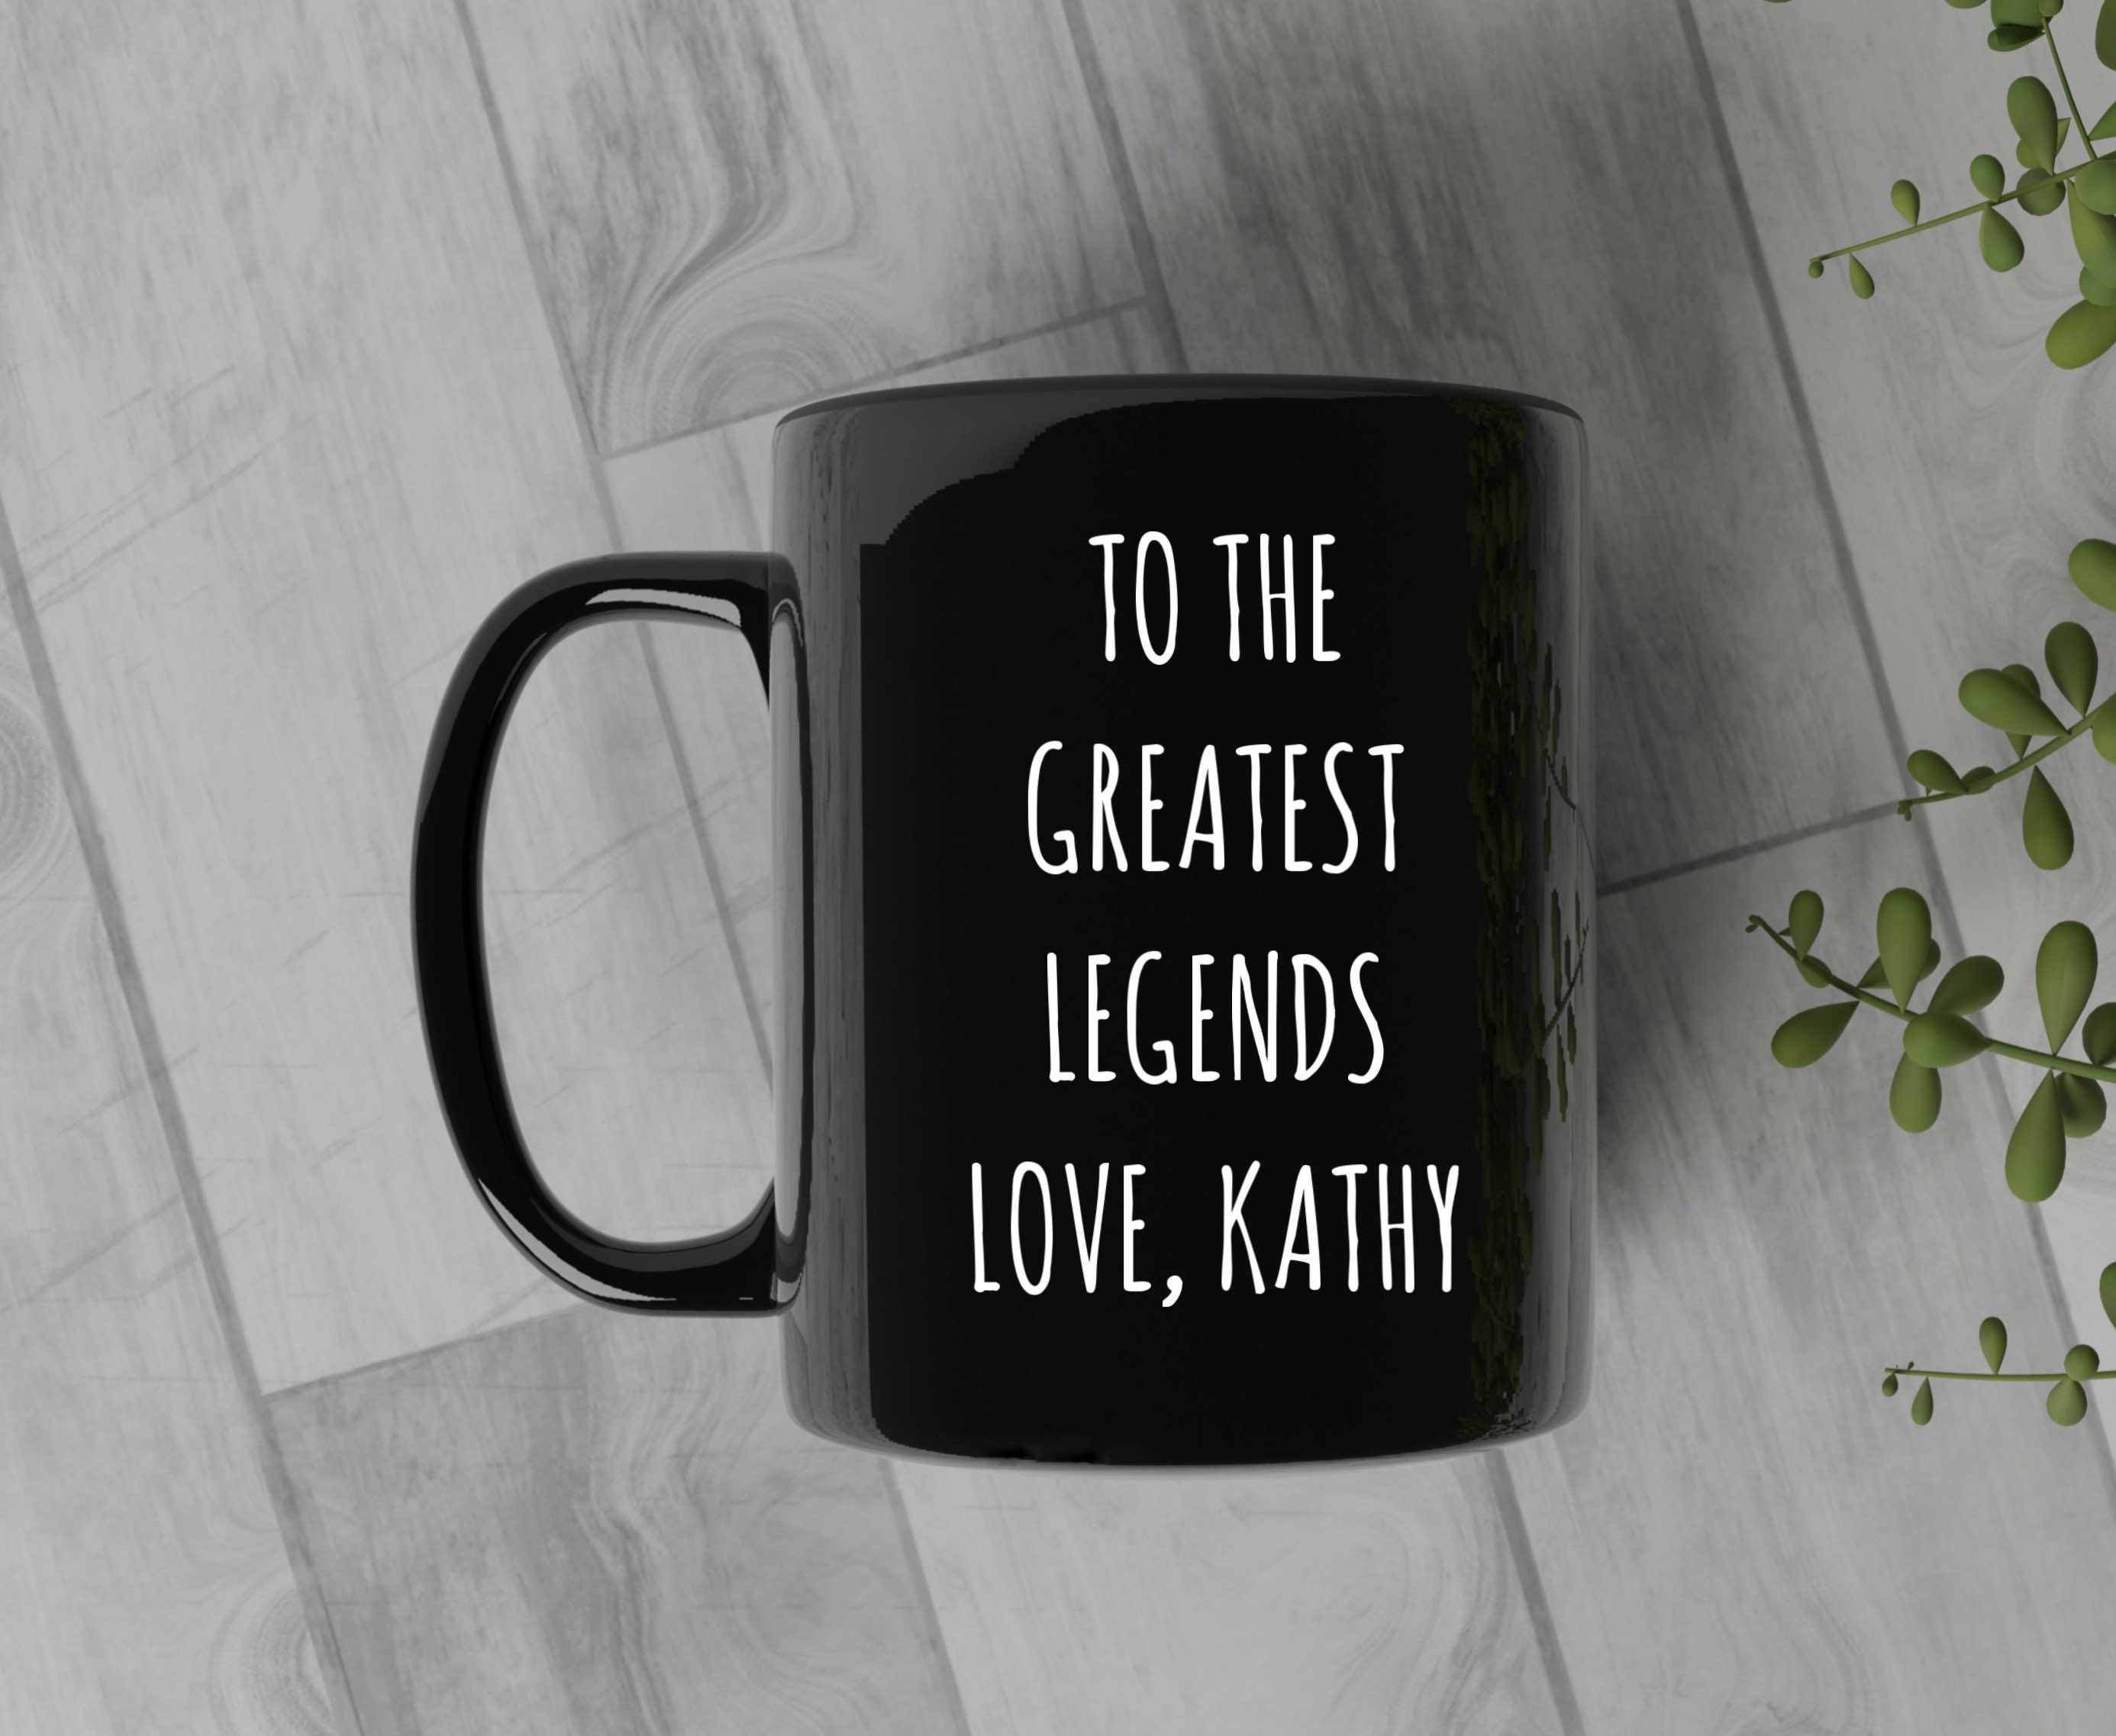 Black mug with love message: My favorite coffee will always be the